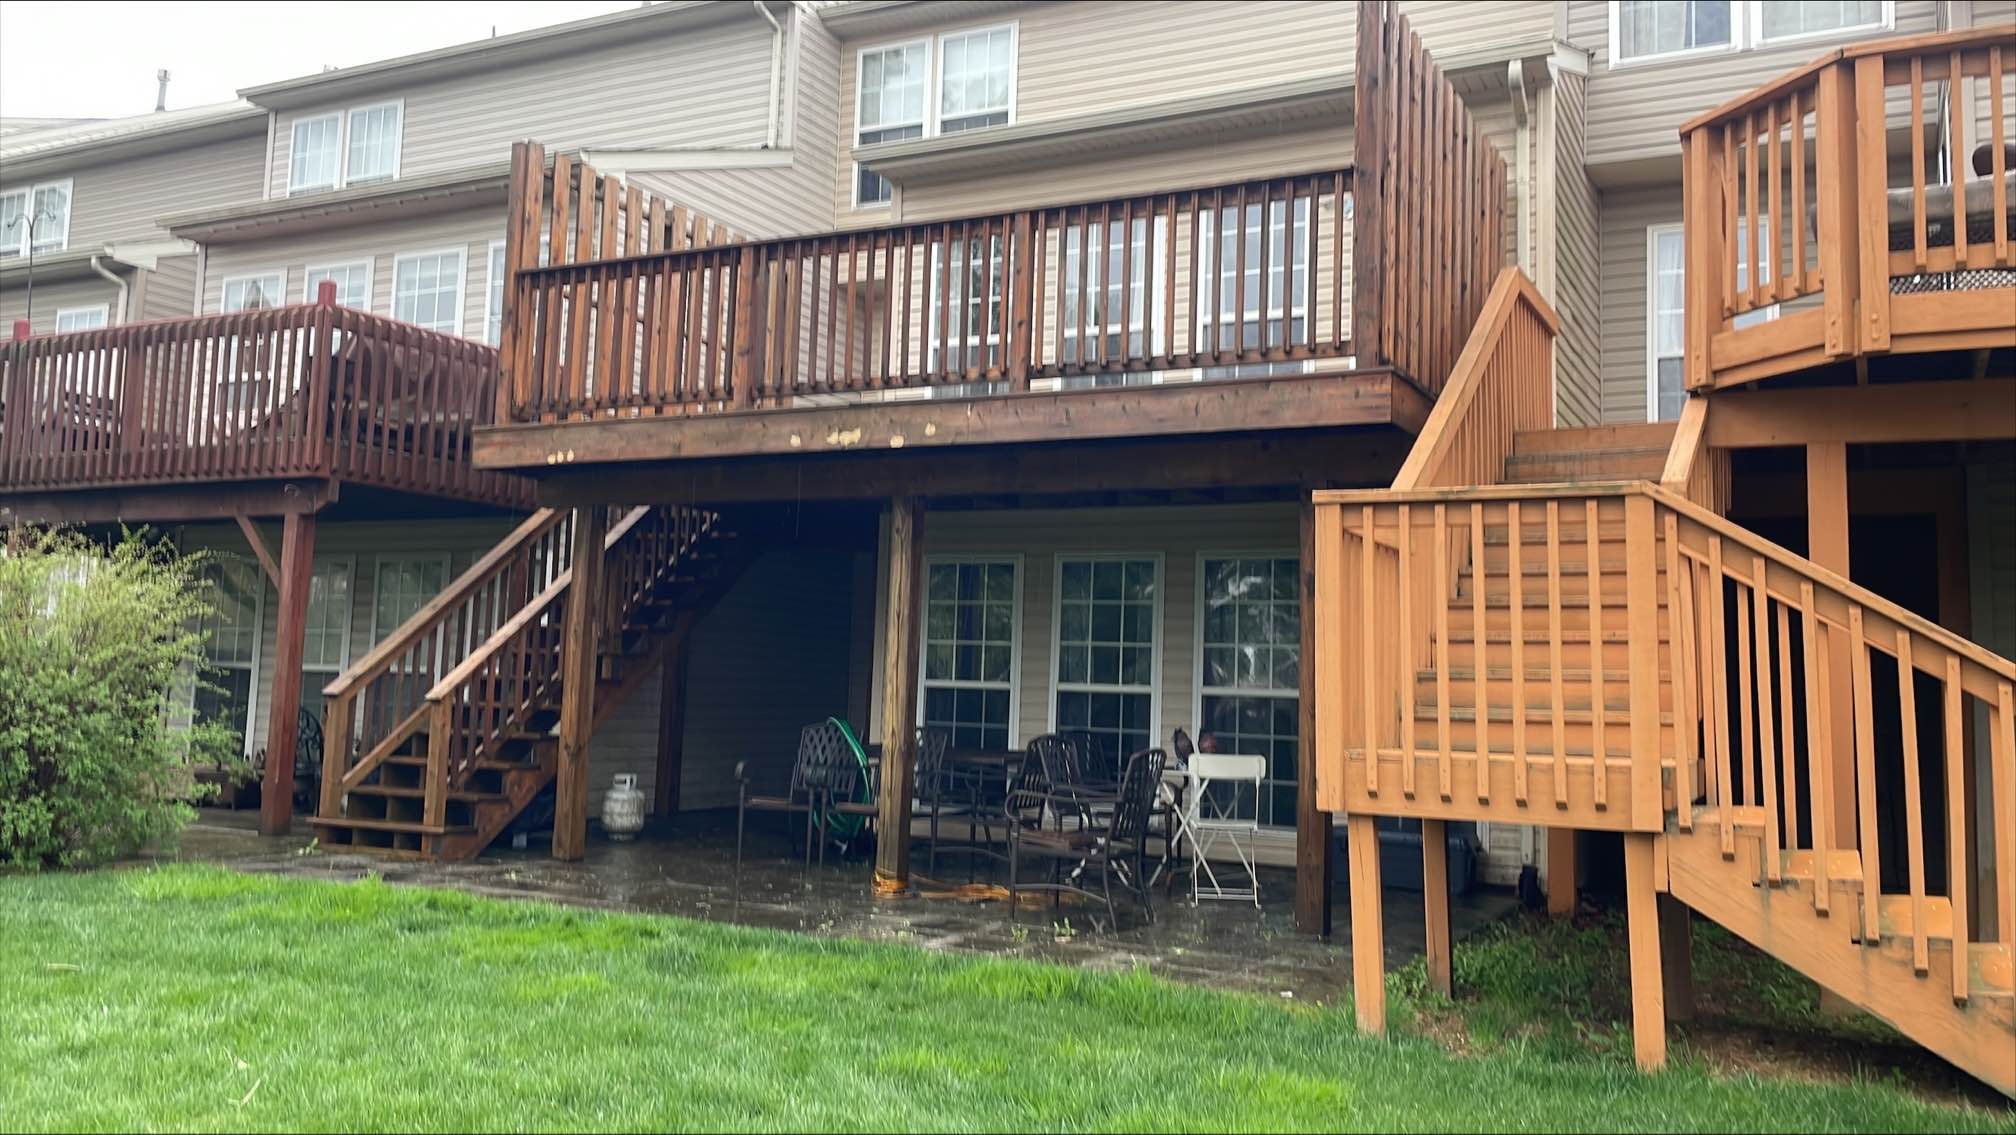 Deck Staining & Painting – Center Valley, PA Before